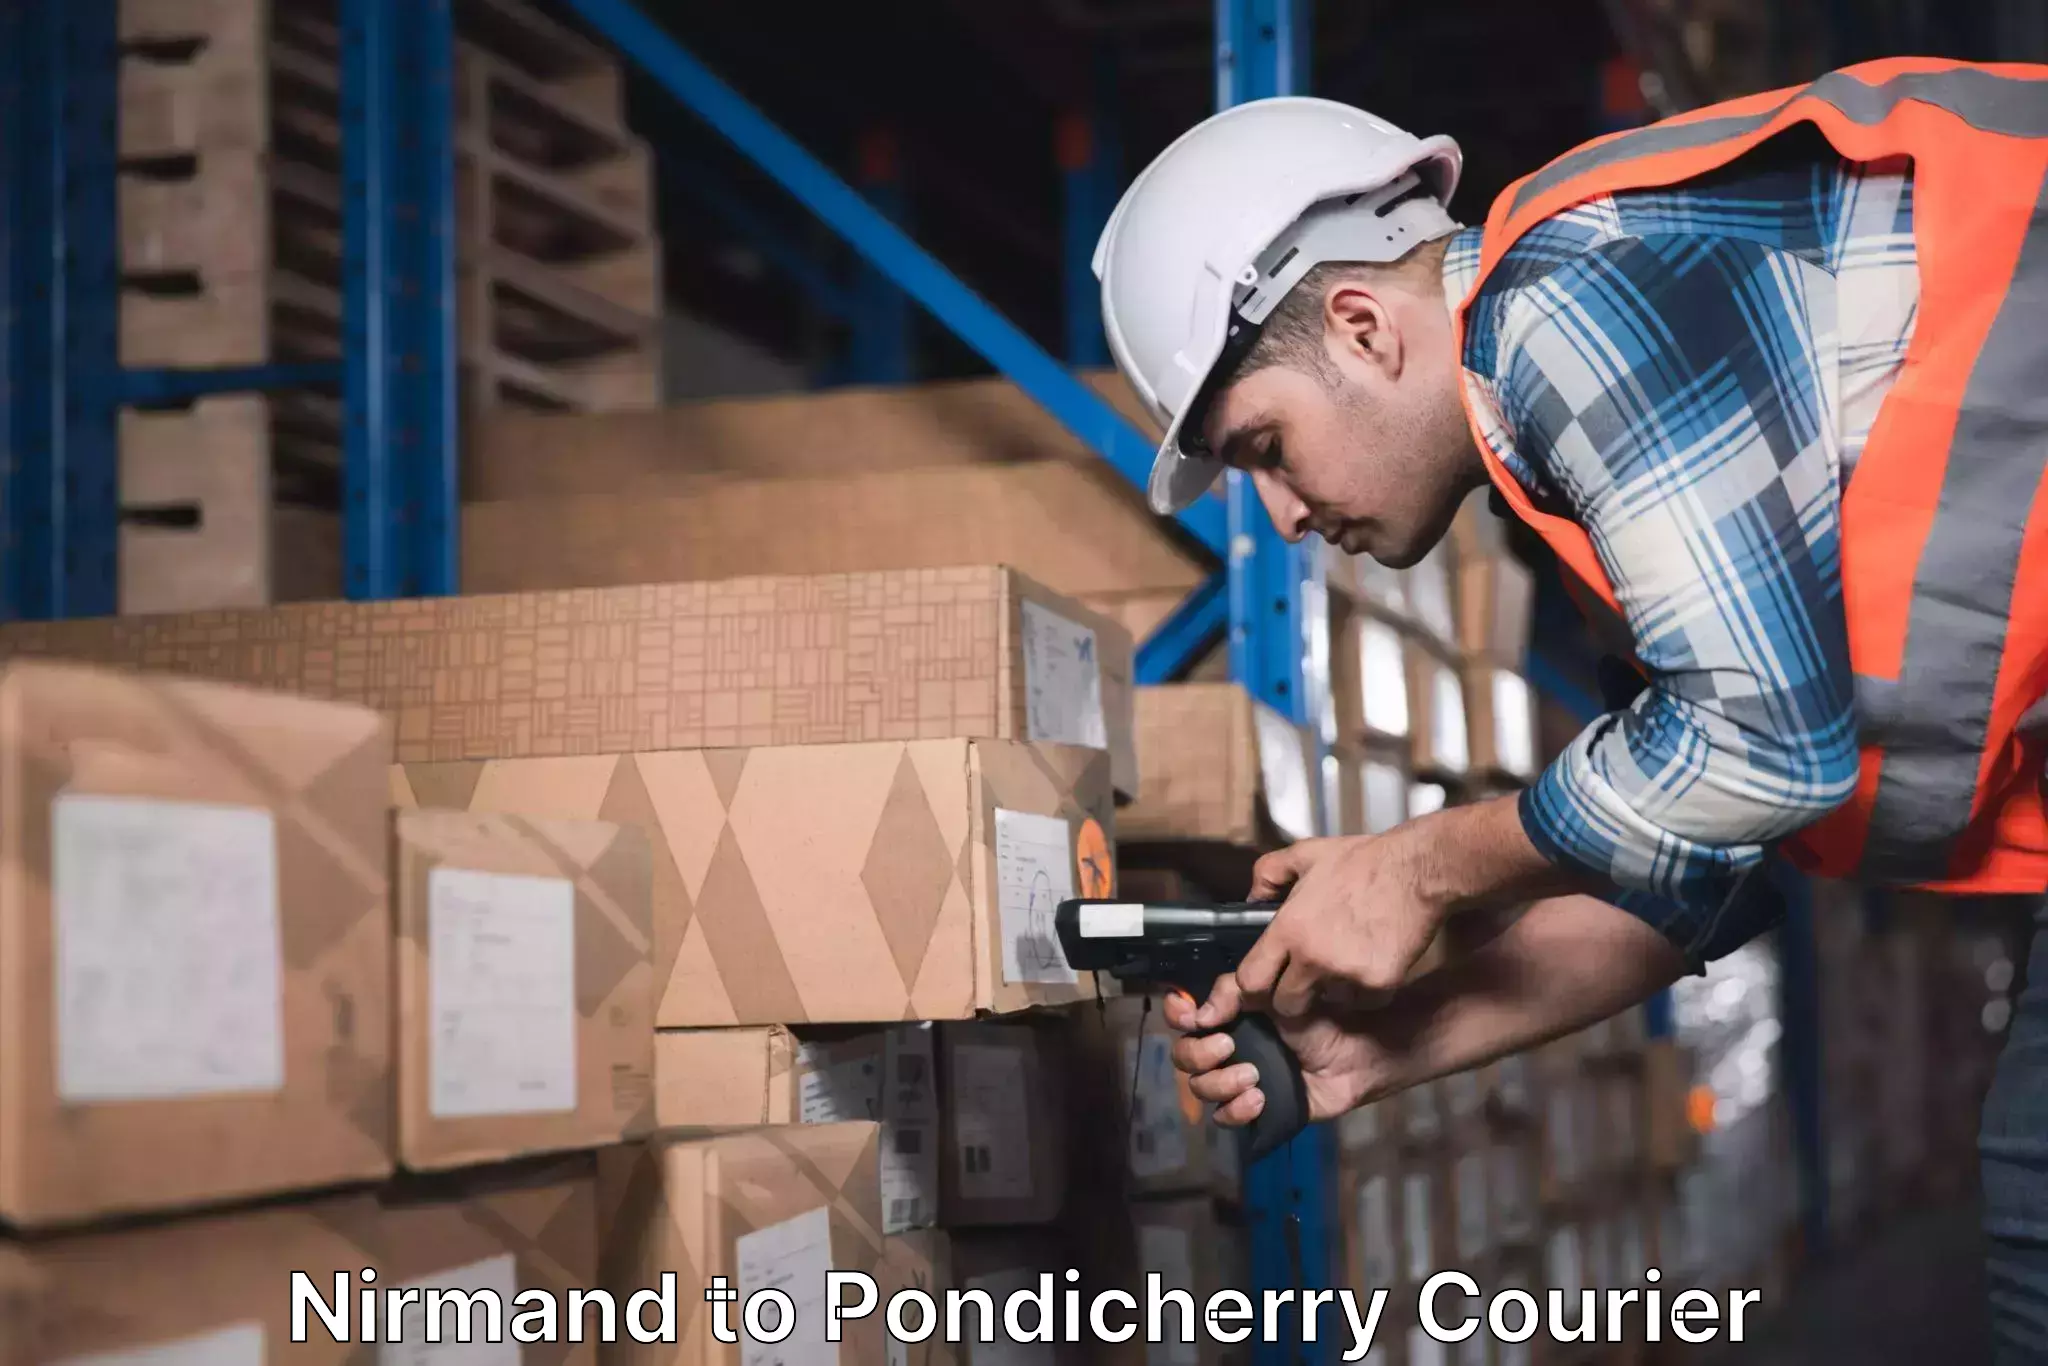 Courier service efficiency in Nirmand to Pondicherry University